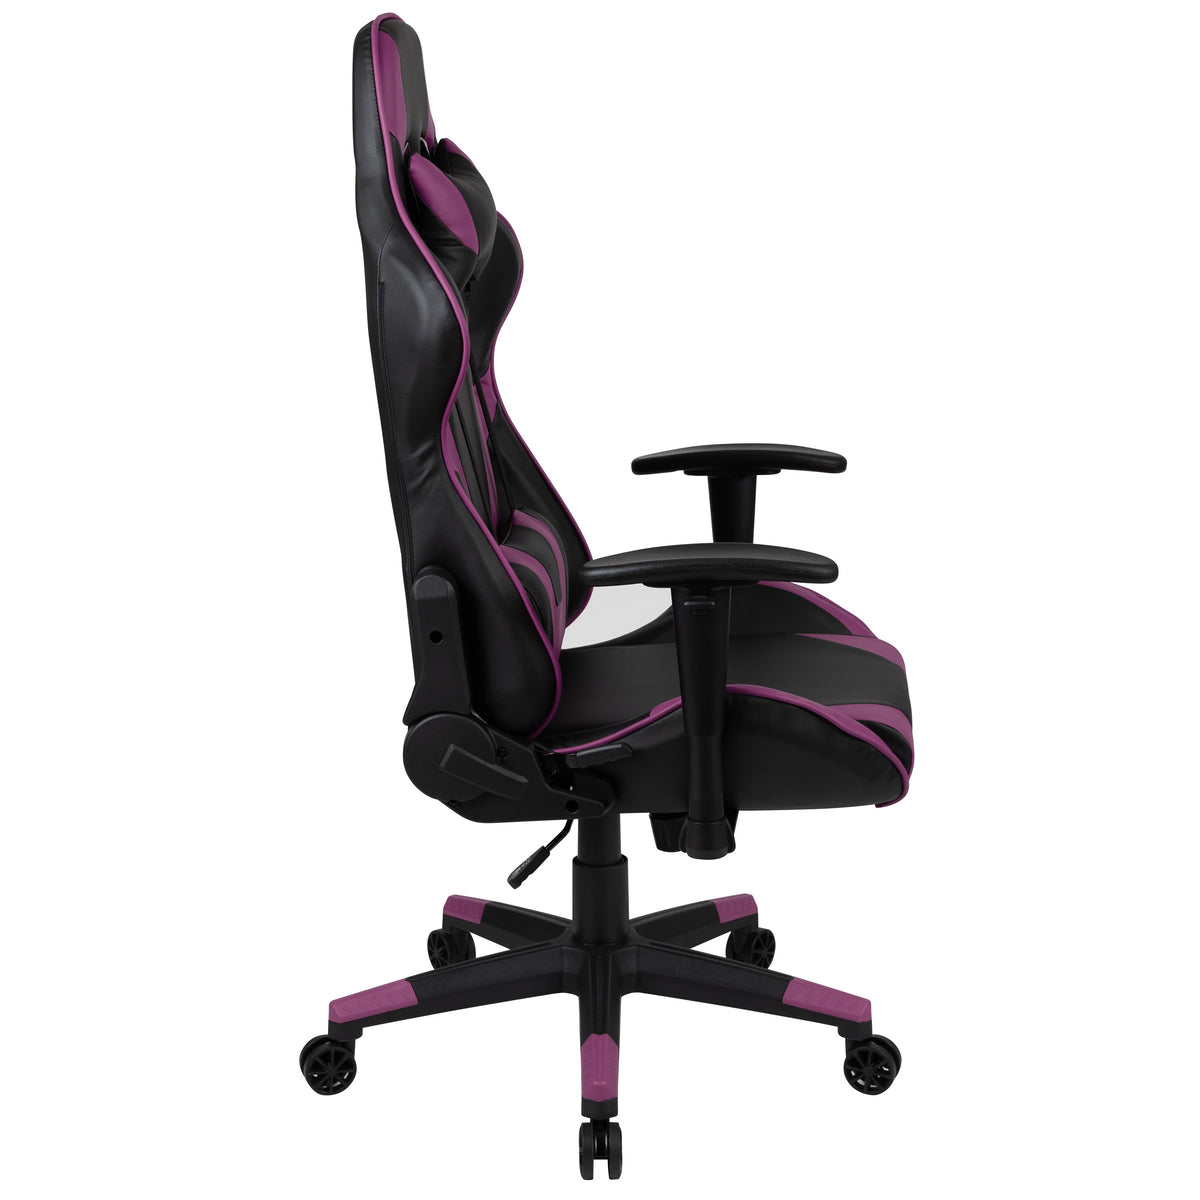 Purple |#| Reclining 360° Swivel Gamers Chair-Black & Purple Faux Leather - Adjustable Arms